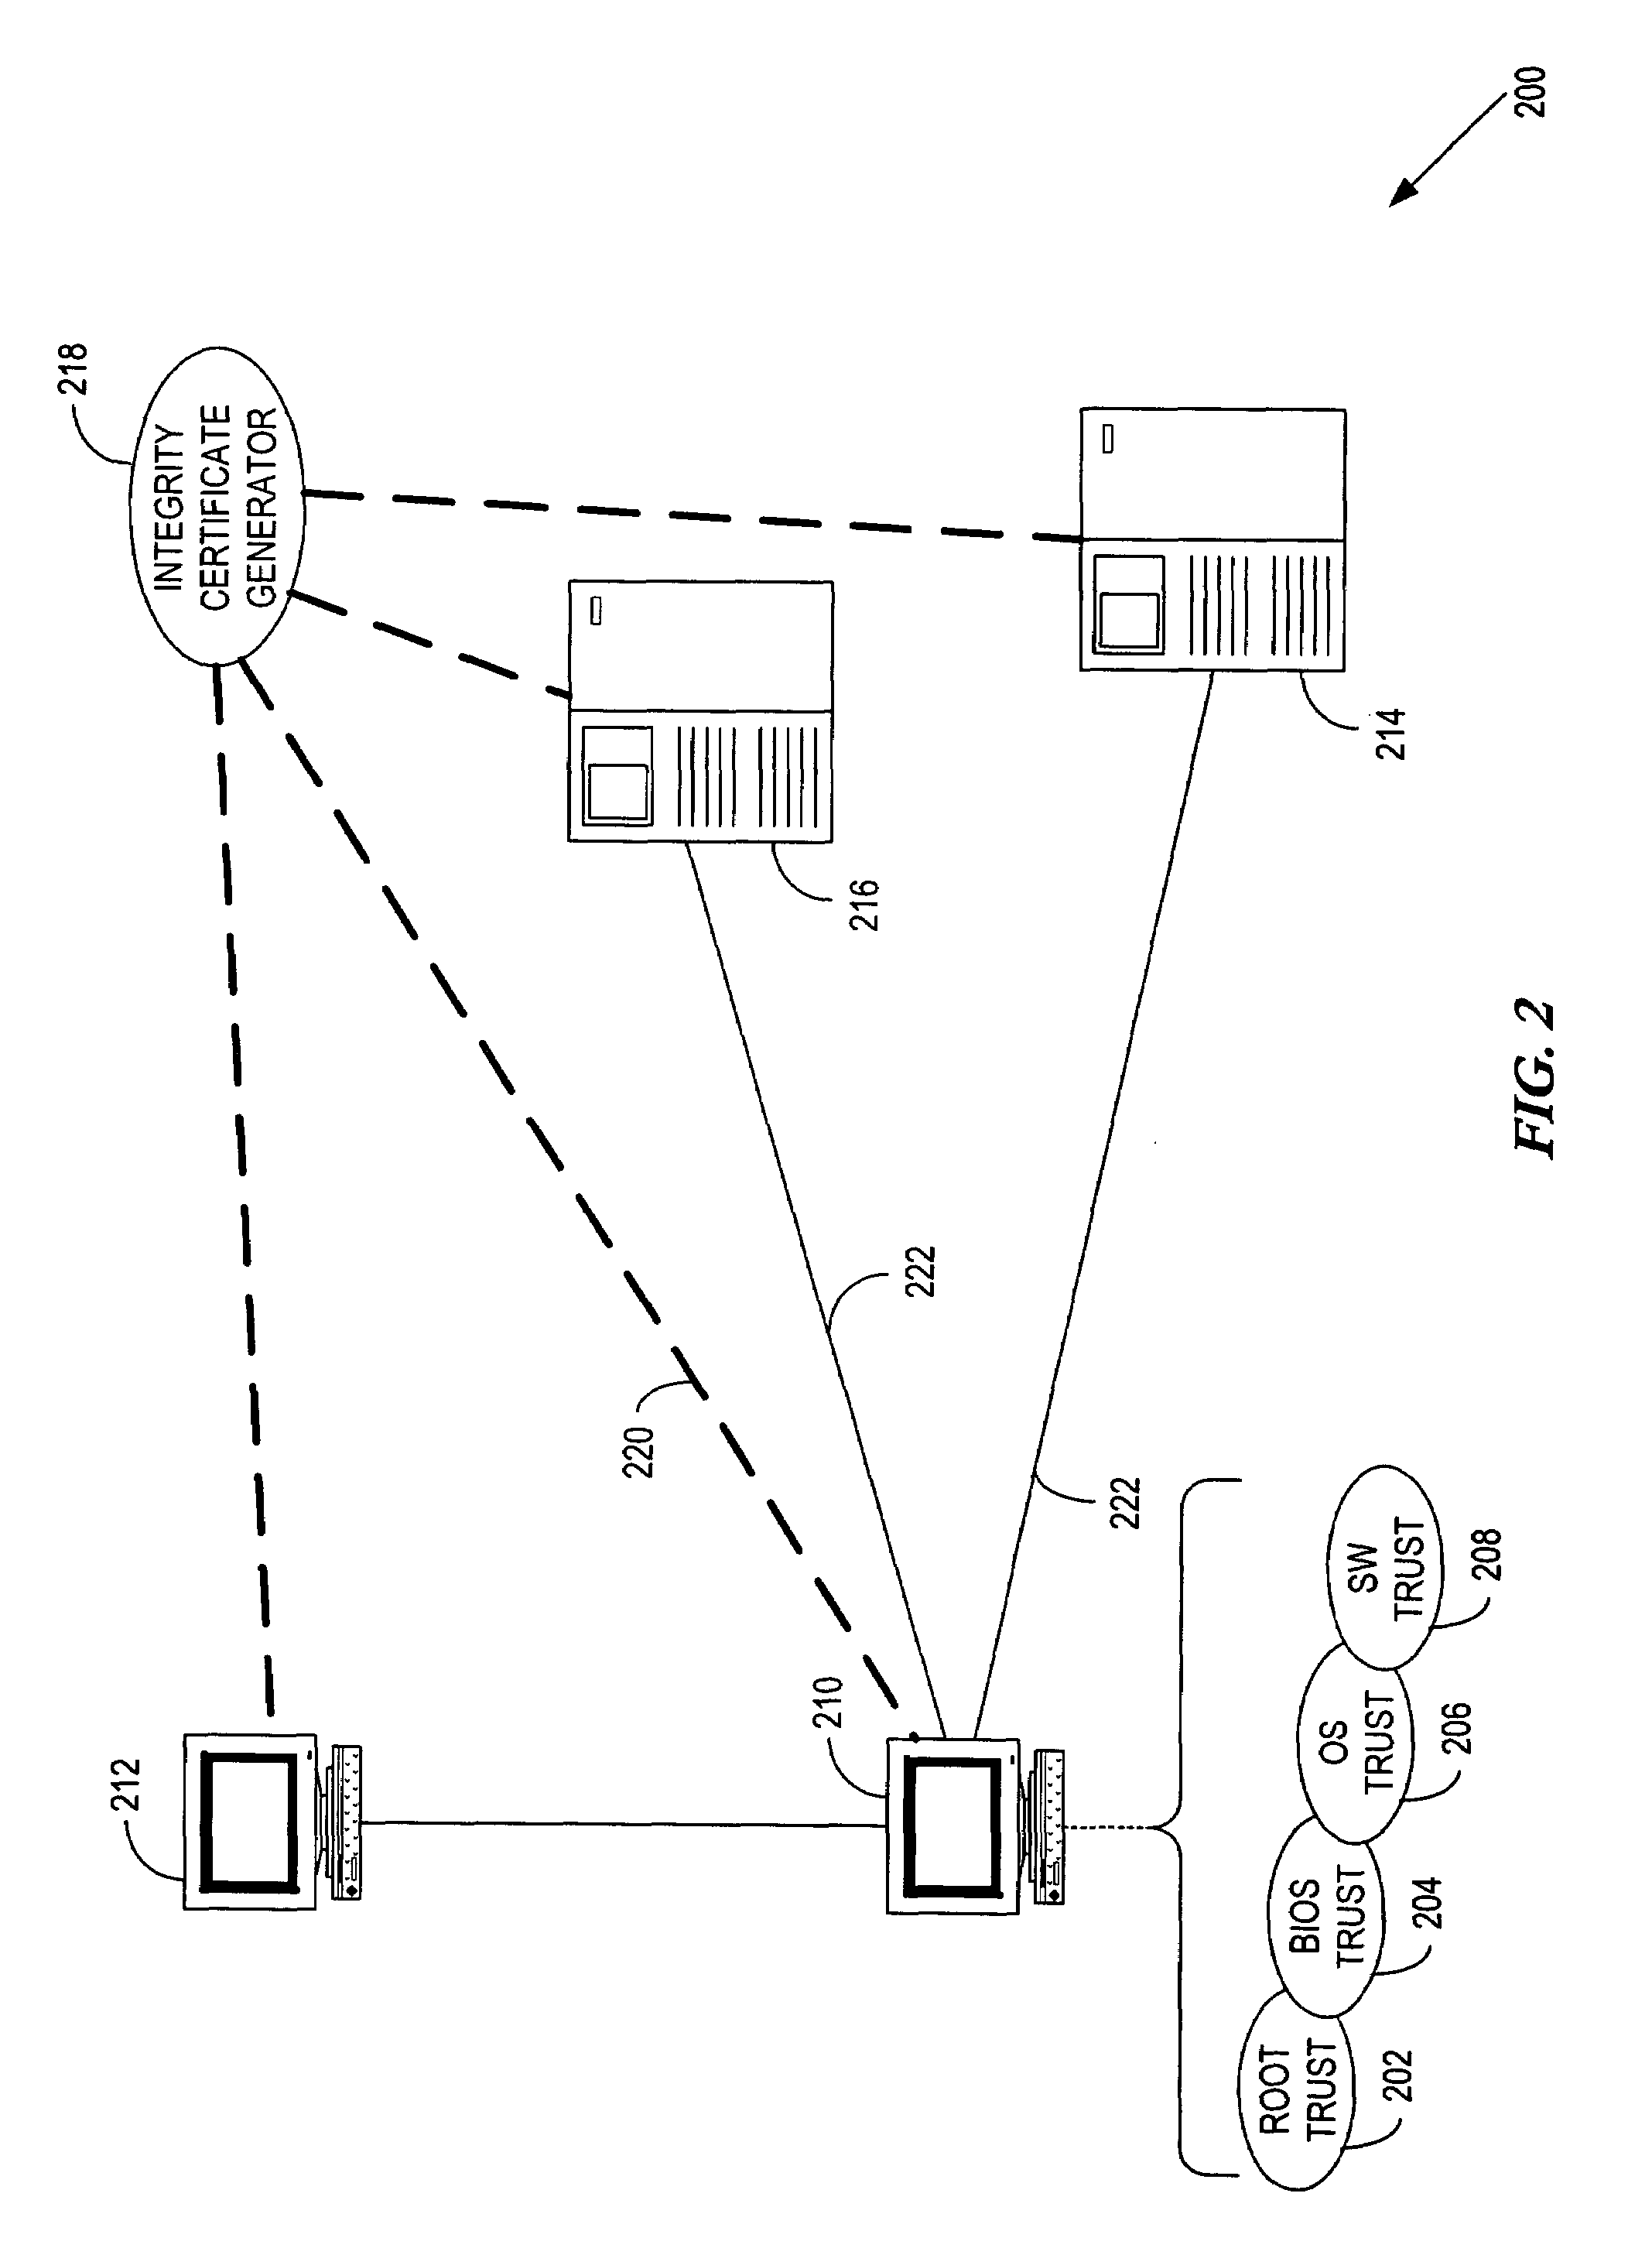 System and method to establish and maintain conditional trust by stating signal of distrust